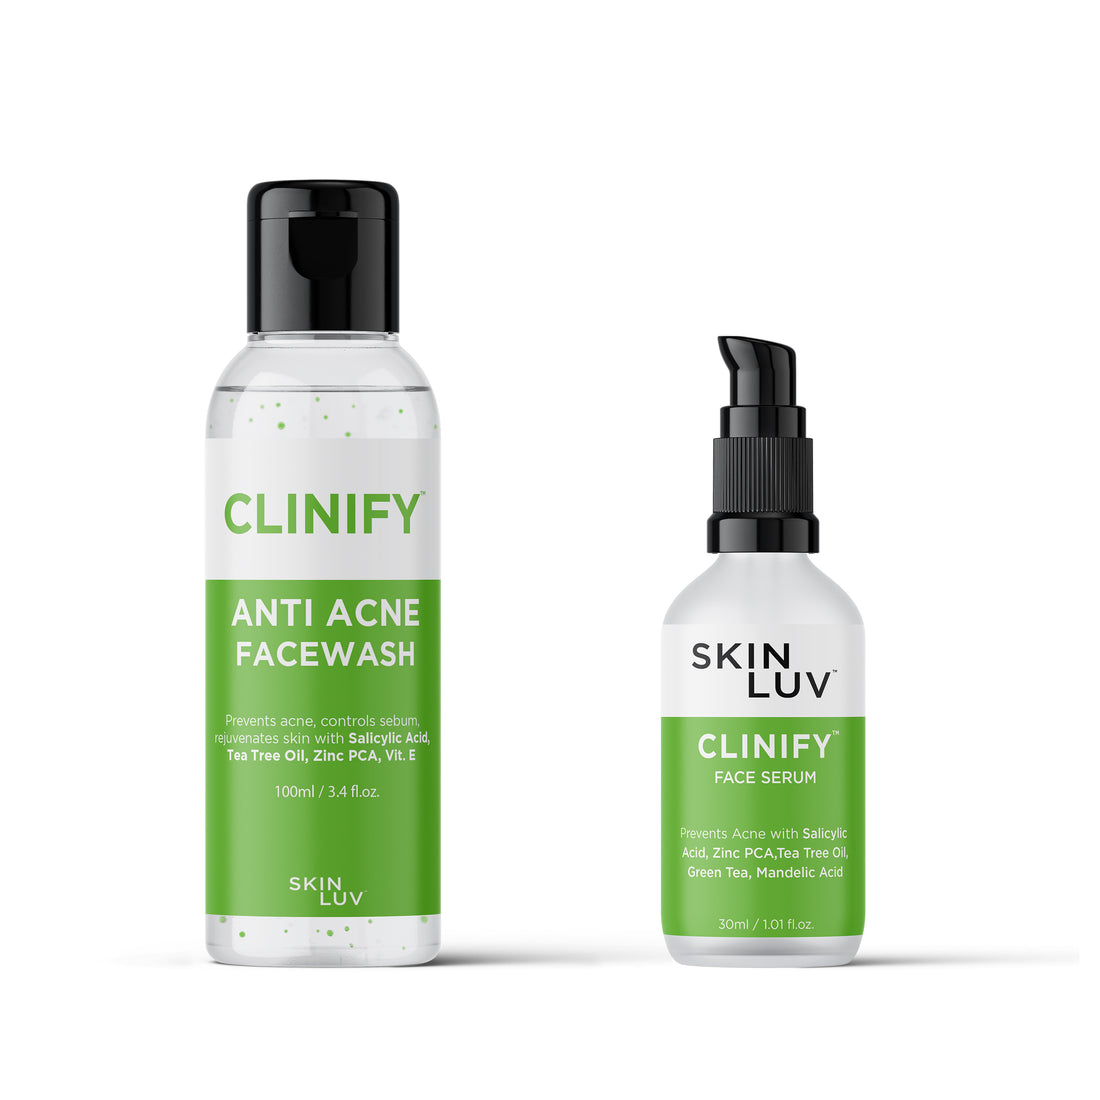 SKINLUV CLINIFY FACE SERUM 30ml + SKINLUV Clinify Anti Acne Facewash Combo